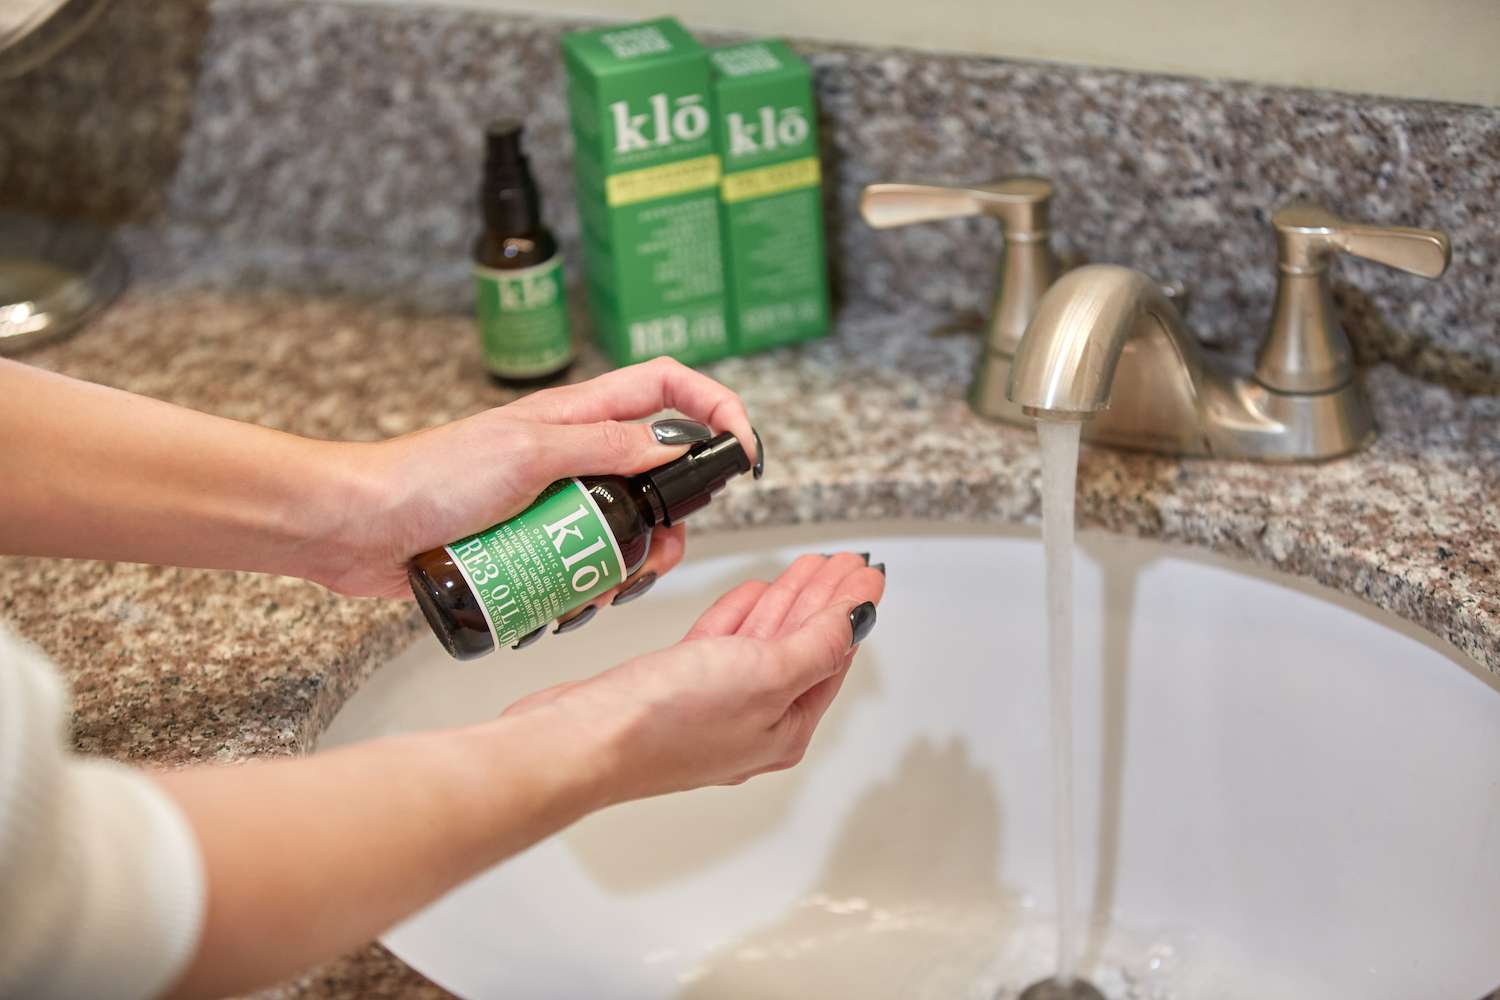 Klo Organic Beauty RE3 oil cleanser being pumped into hands at sink with water running.